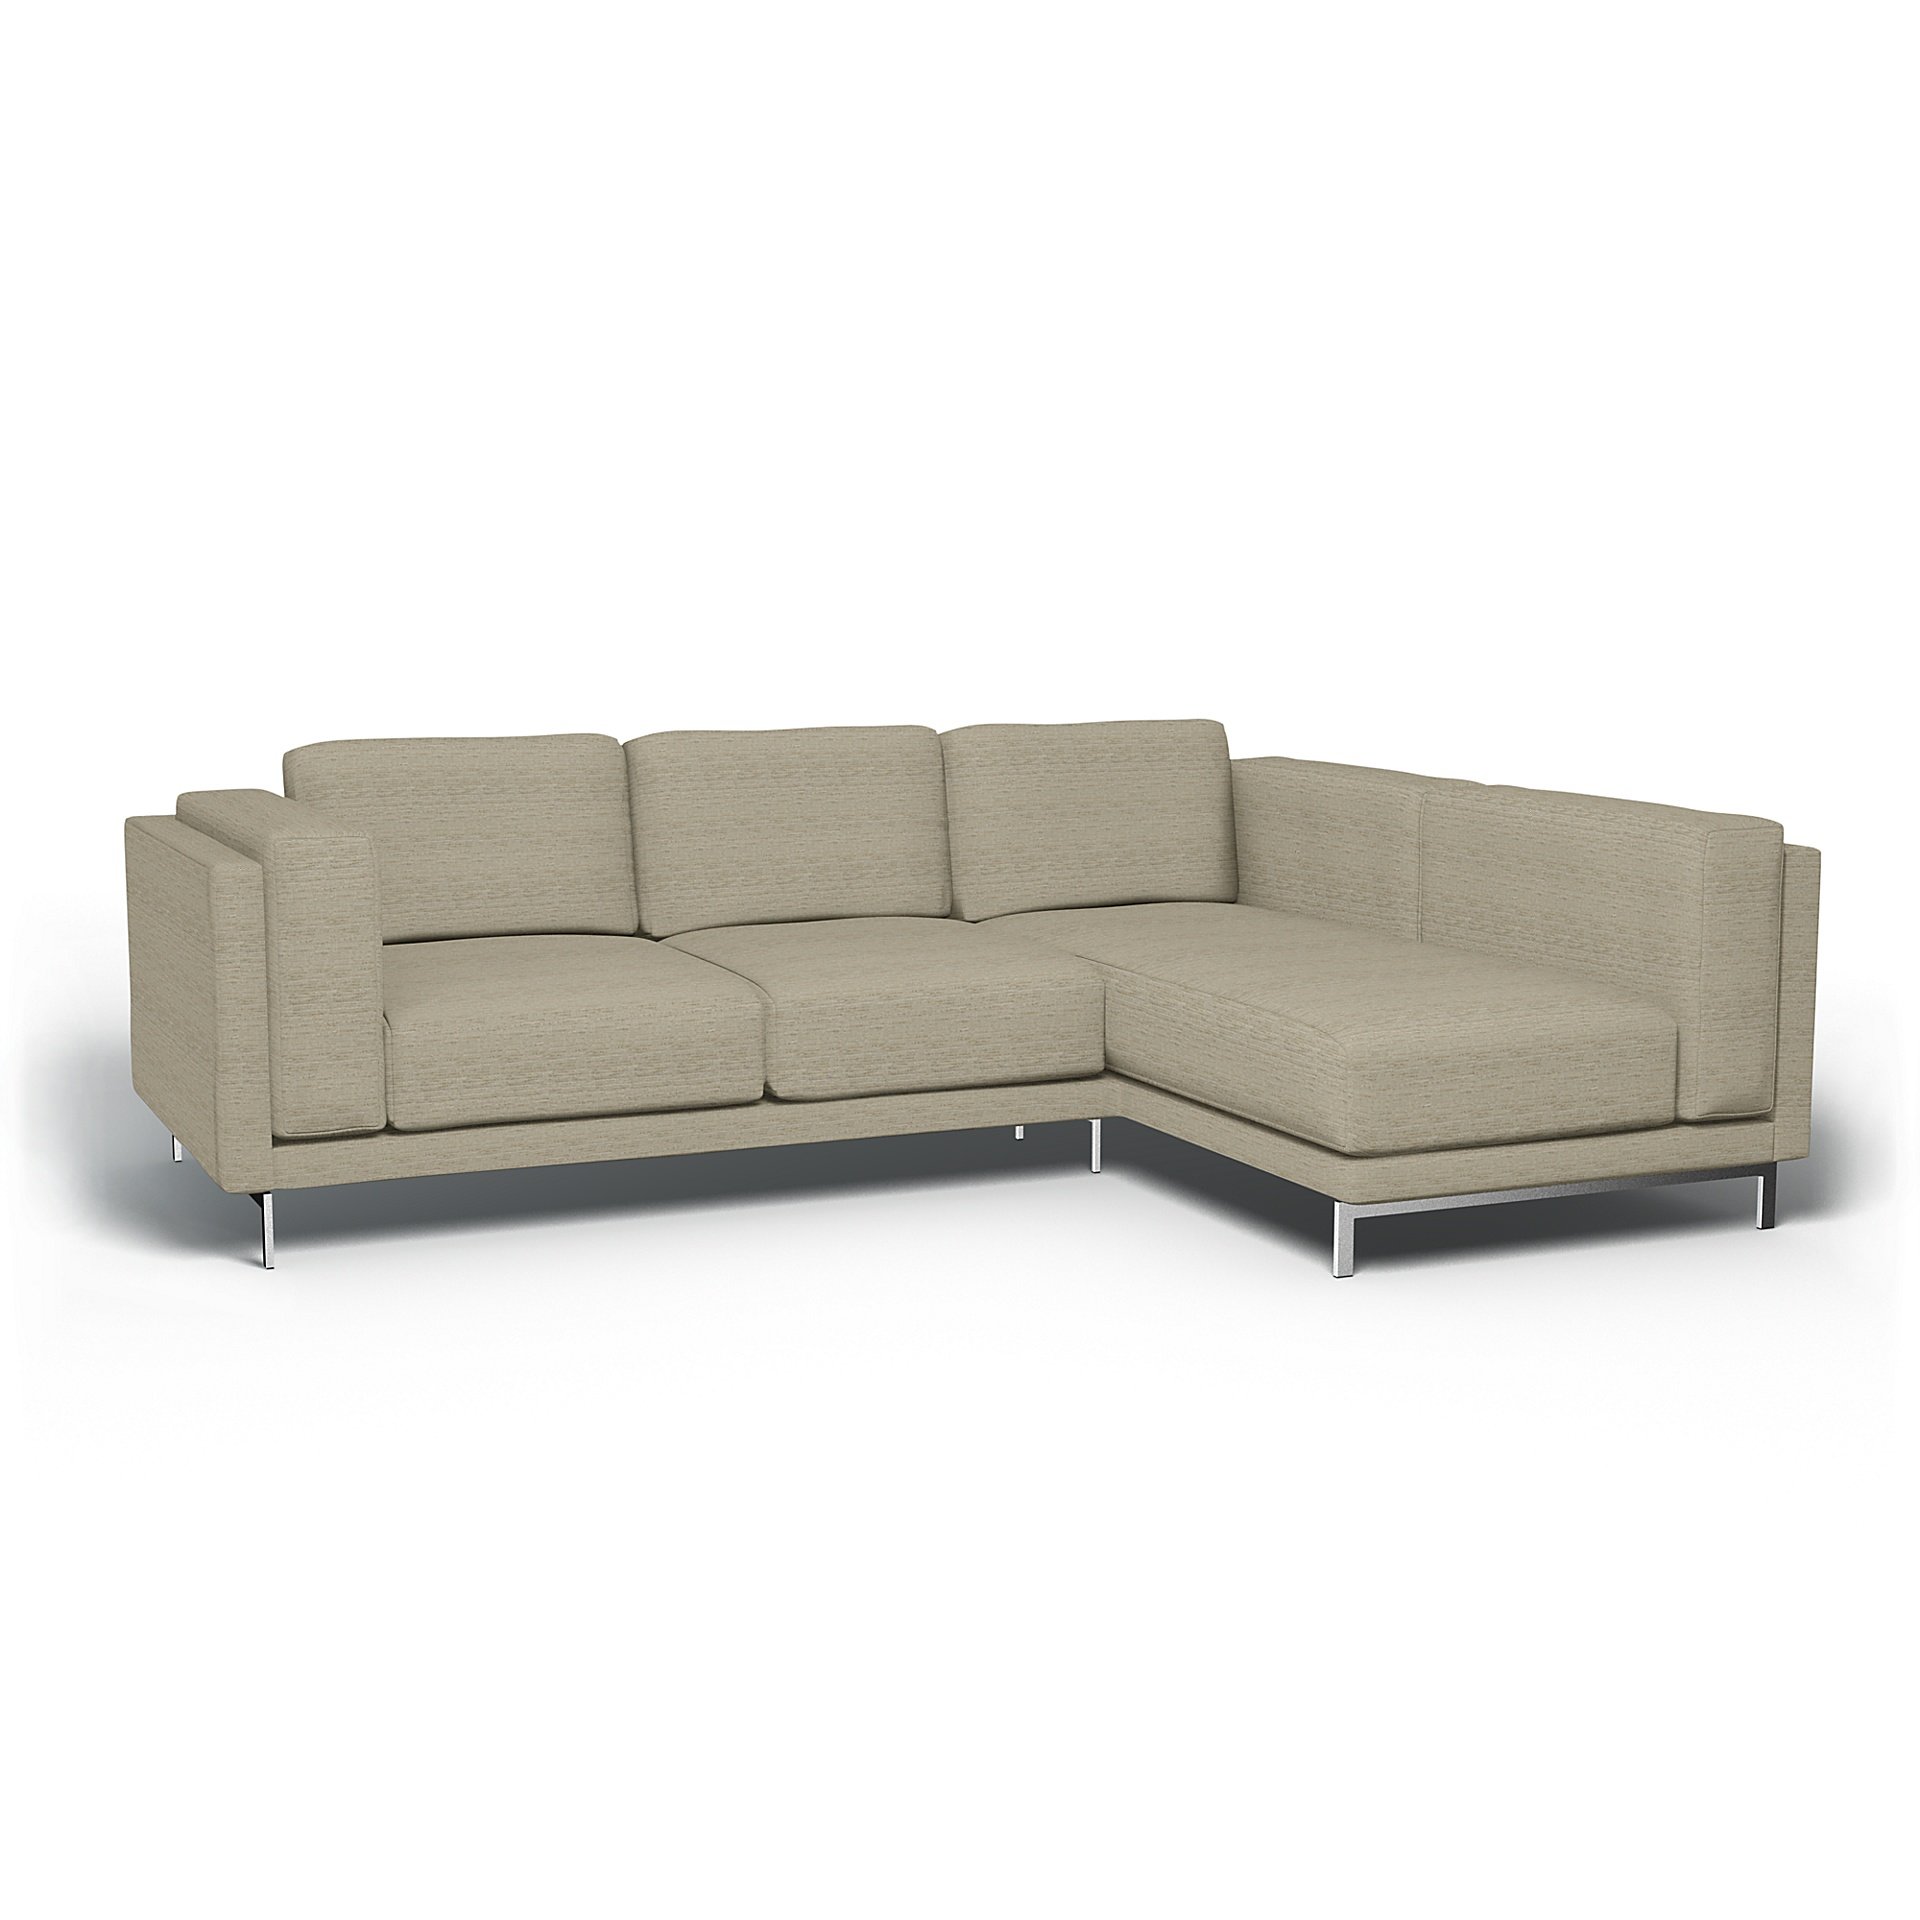 IKEA - Nockeby 3 Seat Sofa with Right Chaise Cover, Light Sand, Boucle & Texture - Bemz